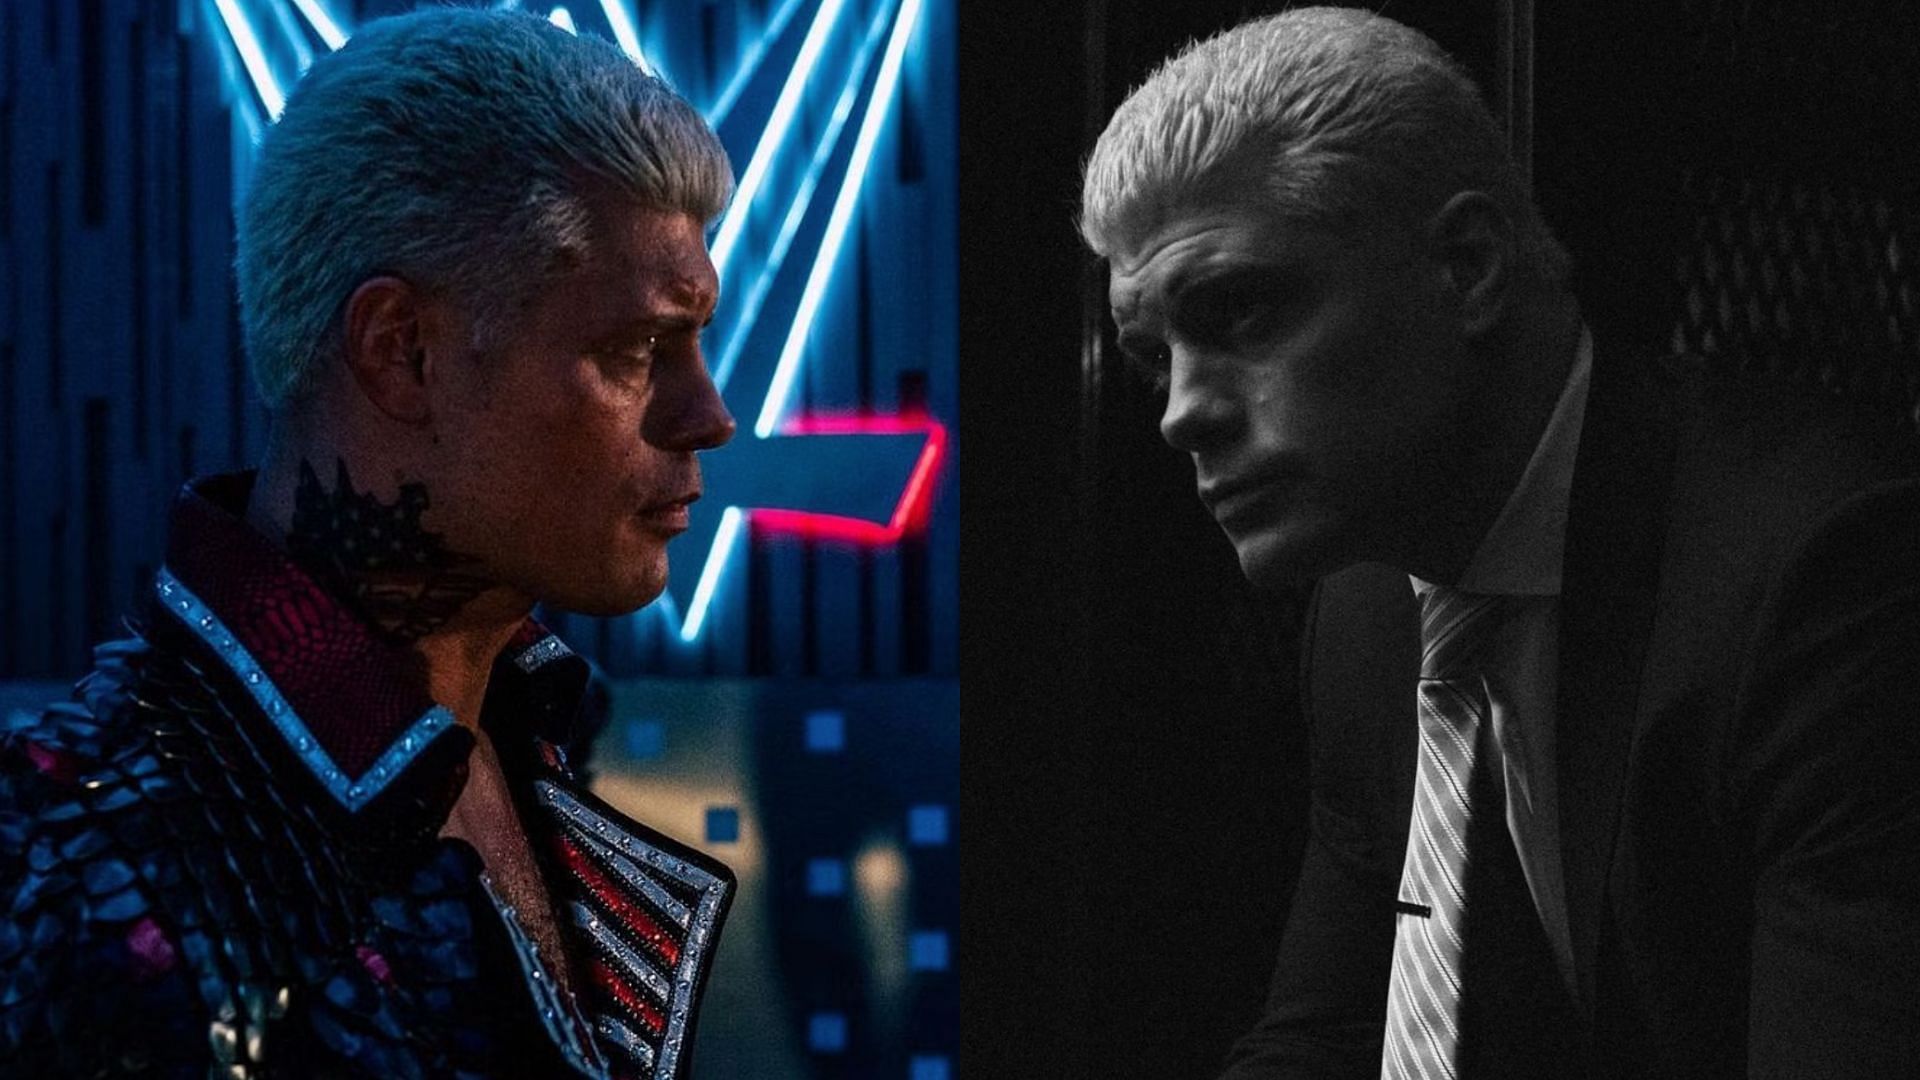 Cody Rhodes will be in action at SummerSlam 2023.